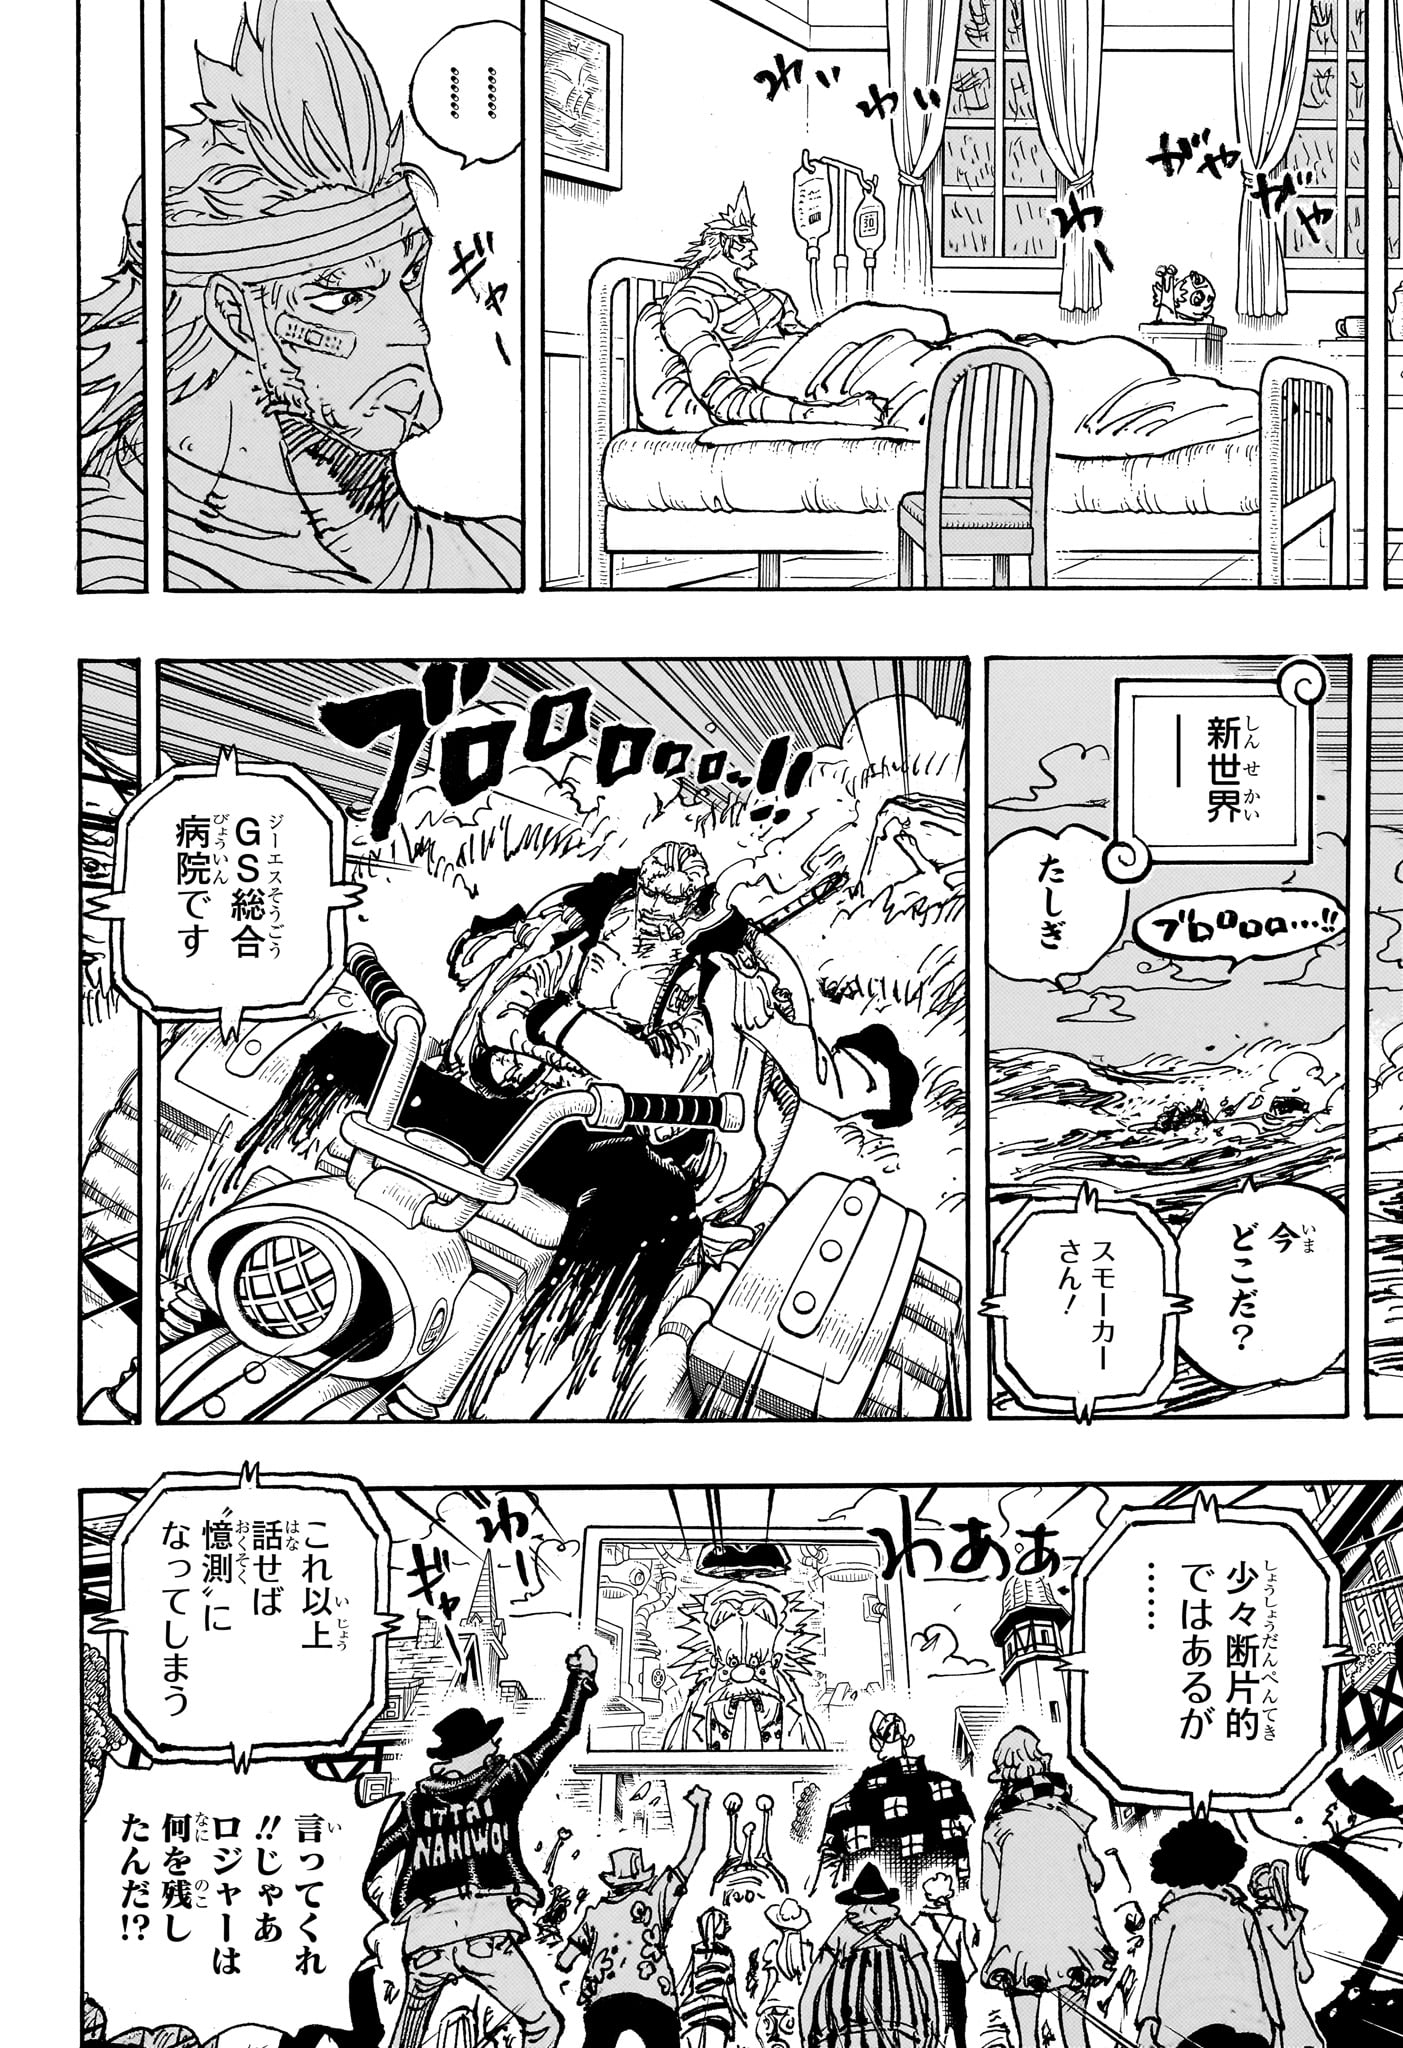 One Piece - Chapter 1117 - Page 4